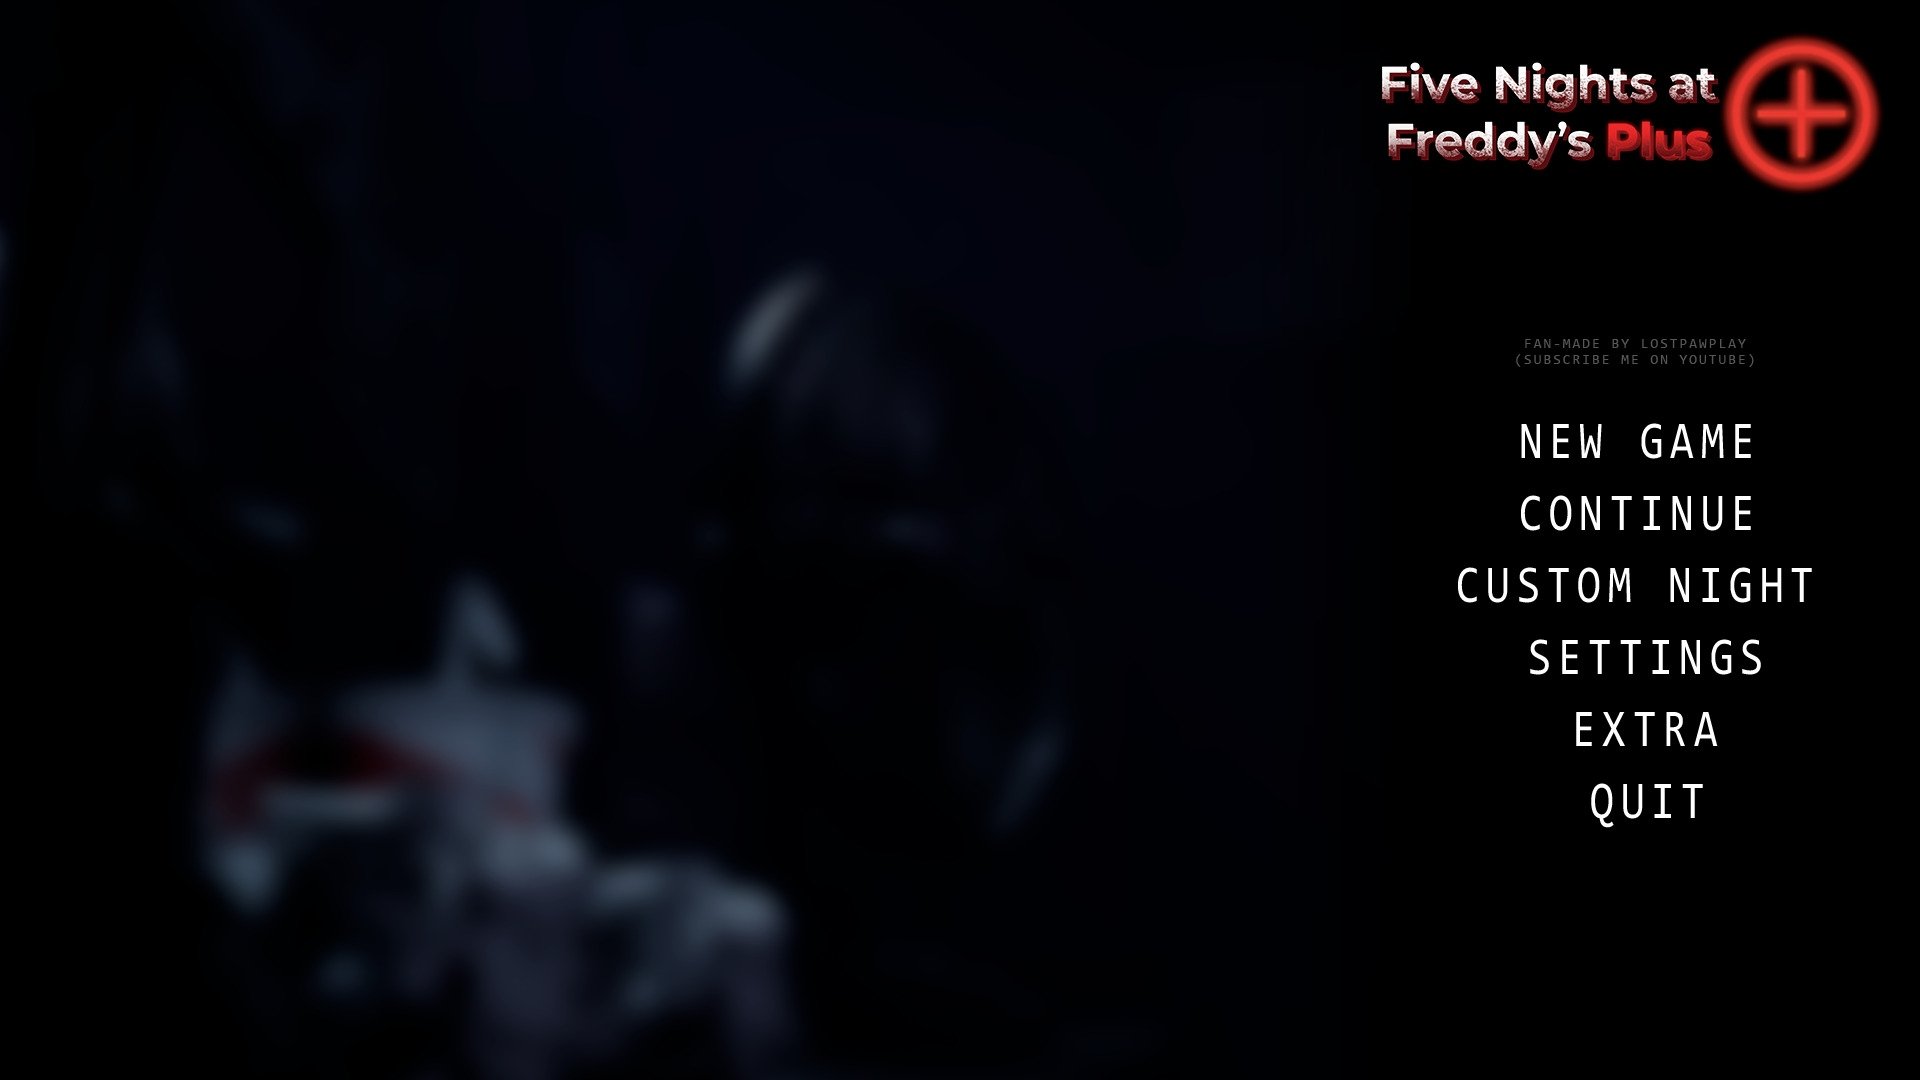 Download Five Nights at Freddy's - Torrent Game for PC